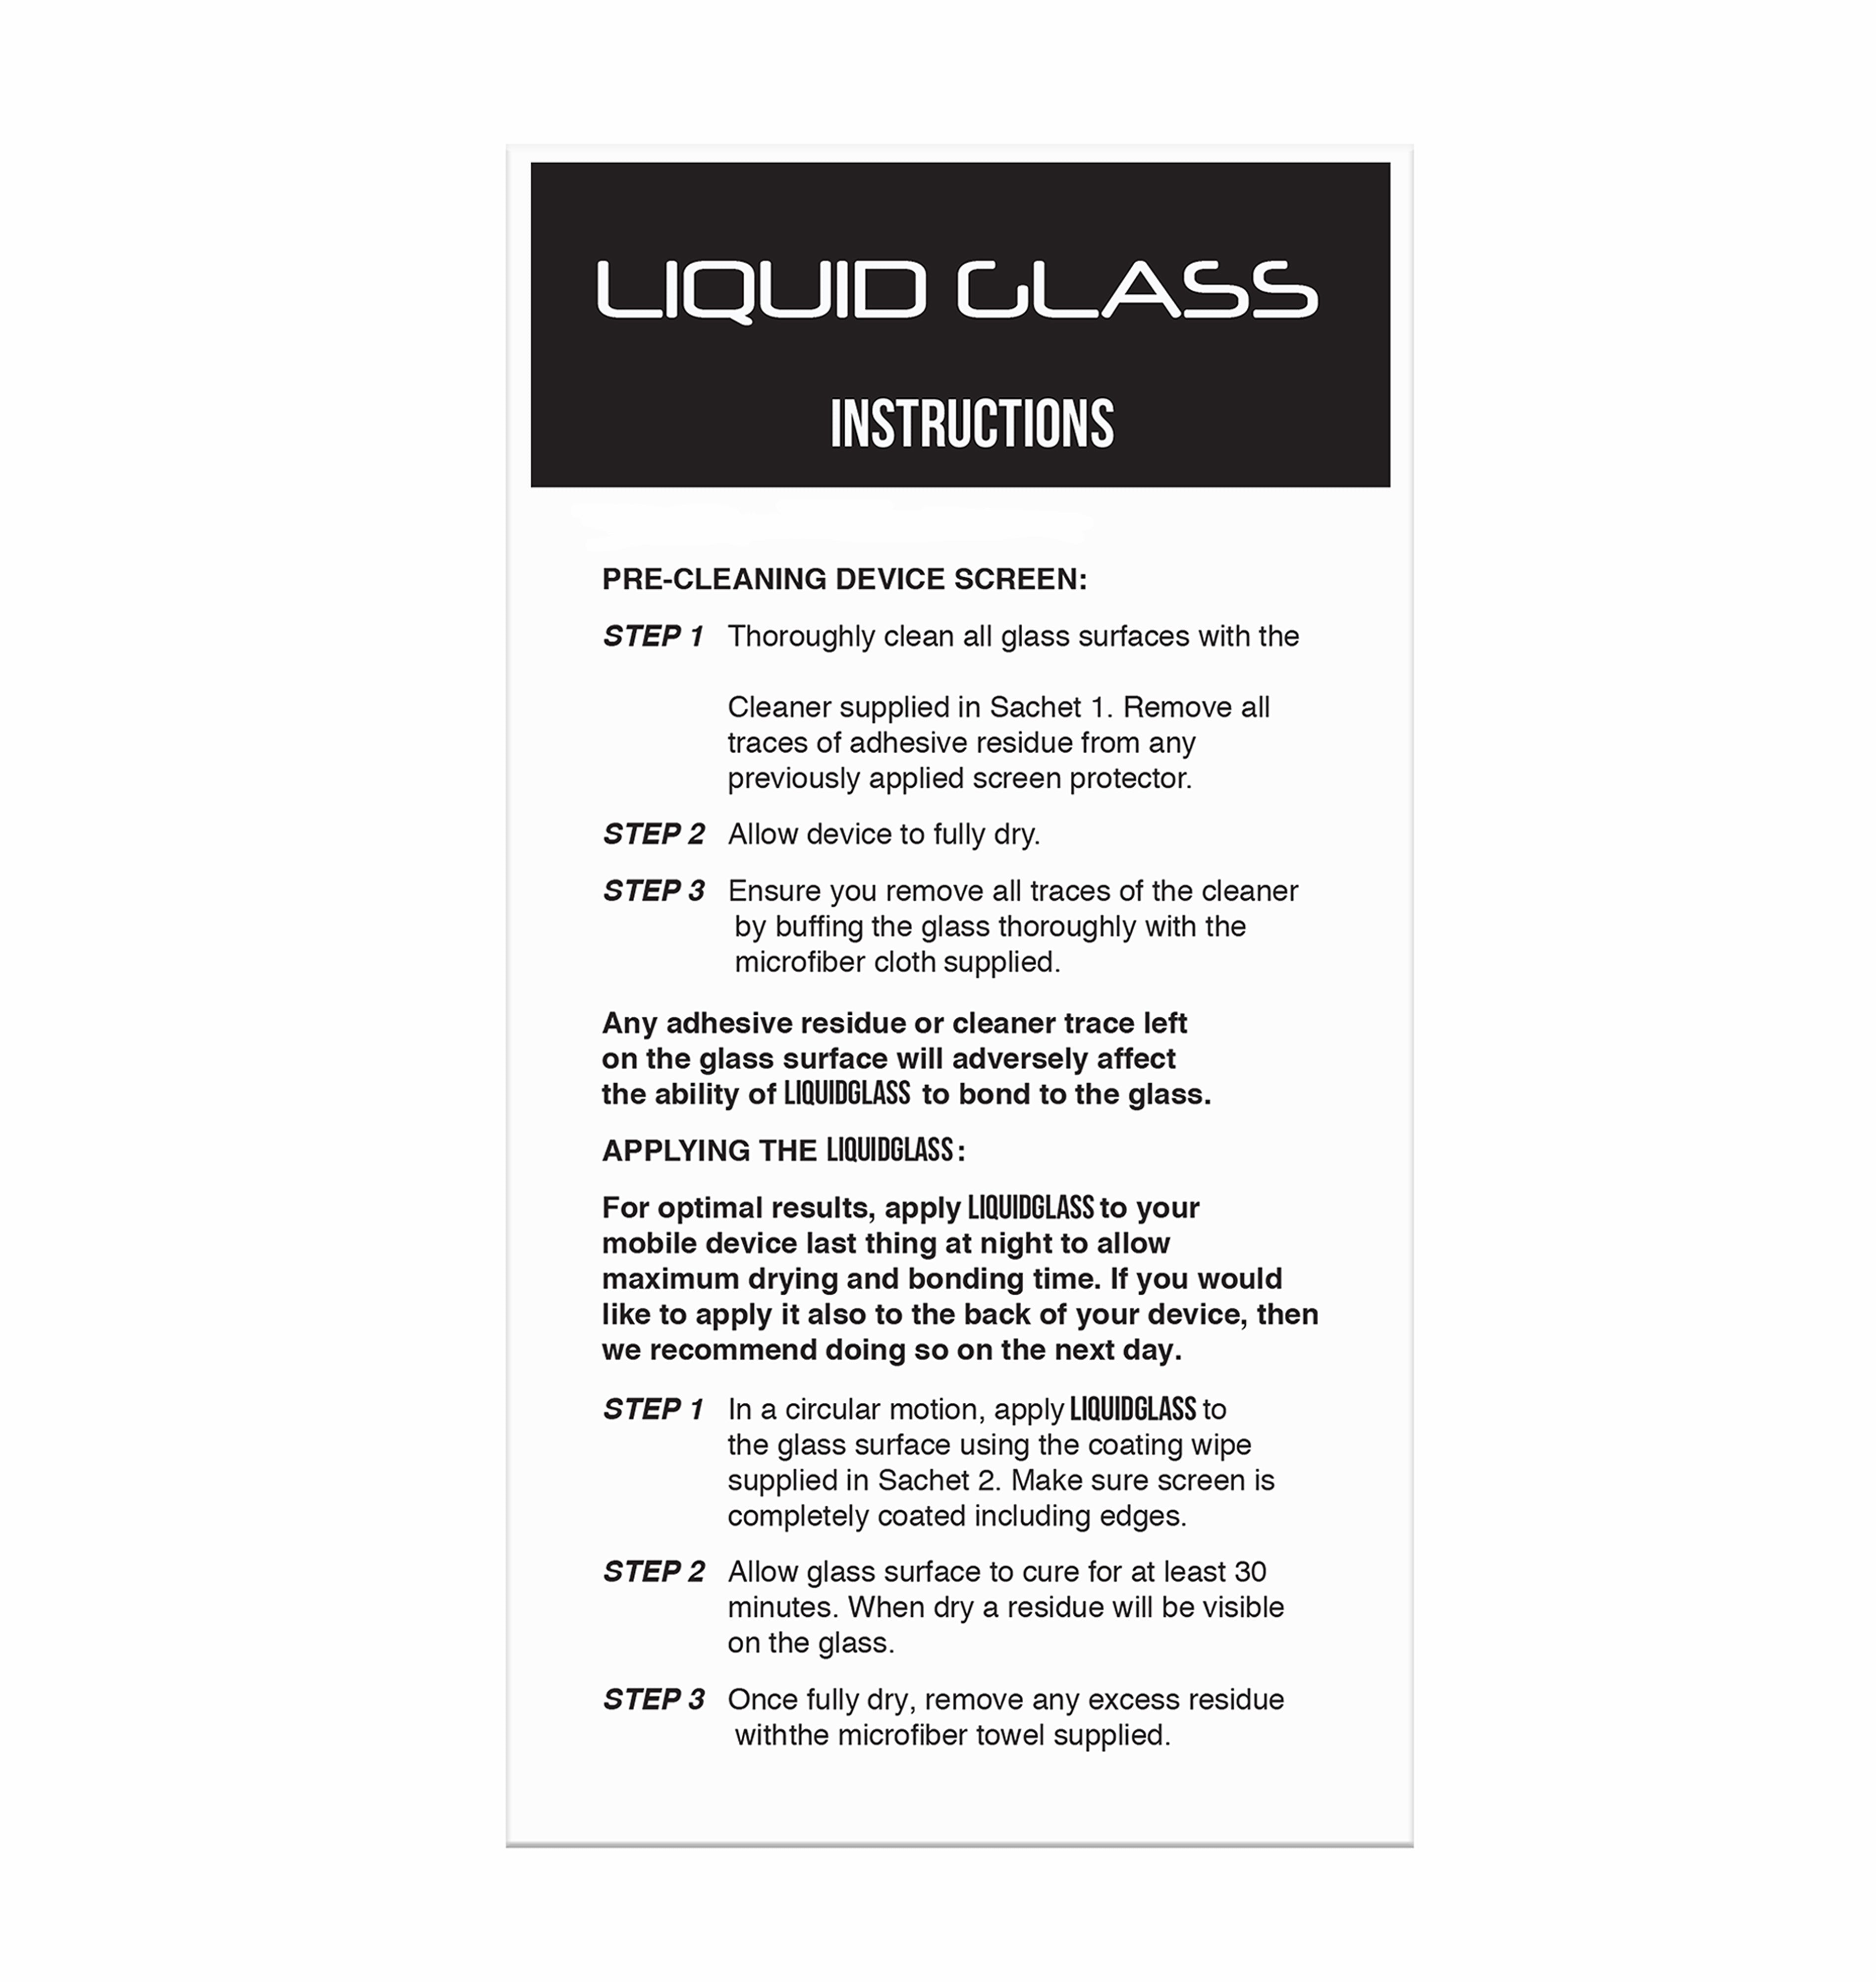 2 Pack Liquid Glass Screen Protector with $250 Screen Protection Guarantee